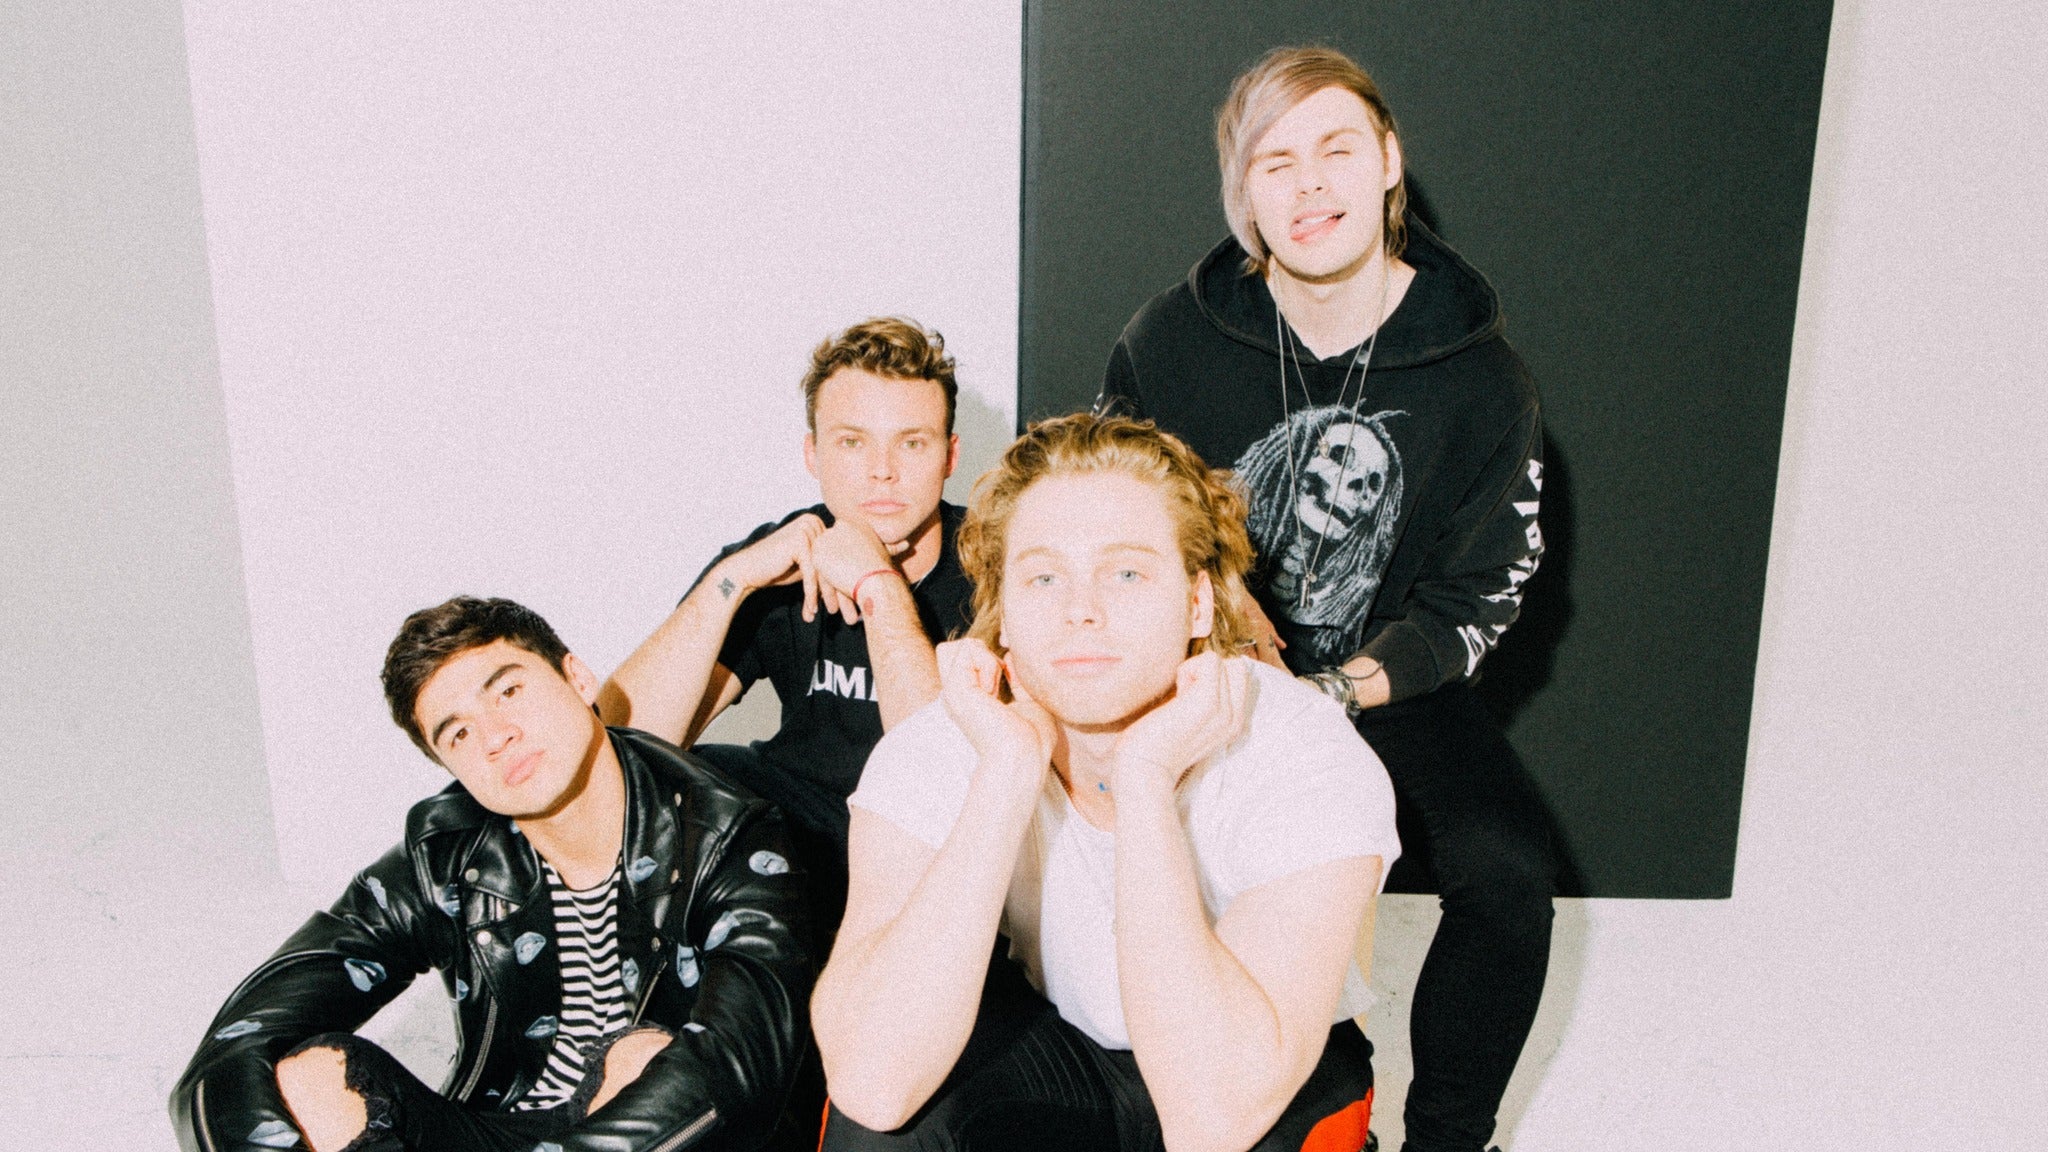 97.9 WNCI's Summer in The City featuring 5 Seconds of Summer in Columbus promo photo for Exclusive presale offer code